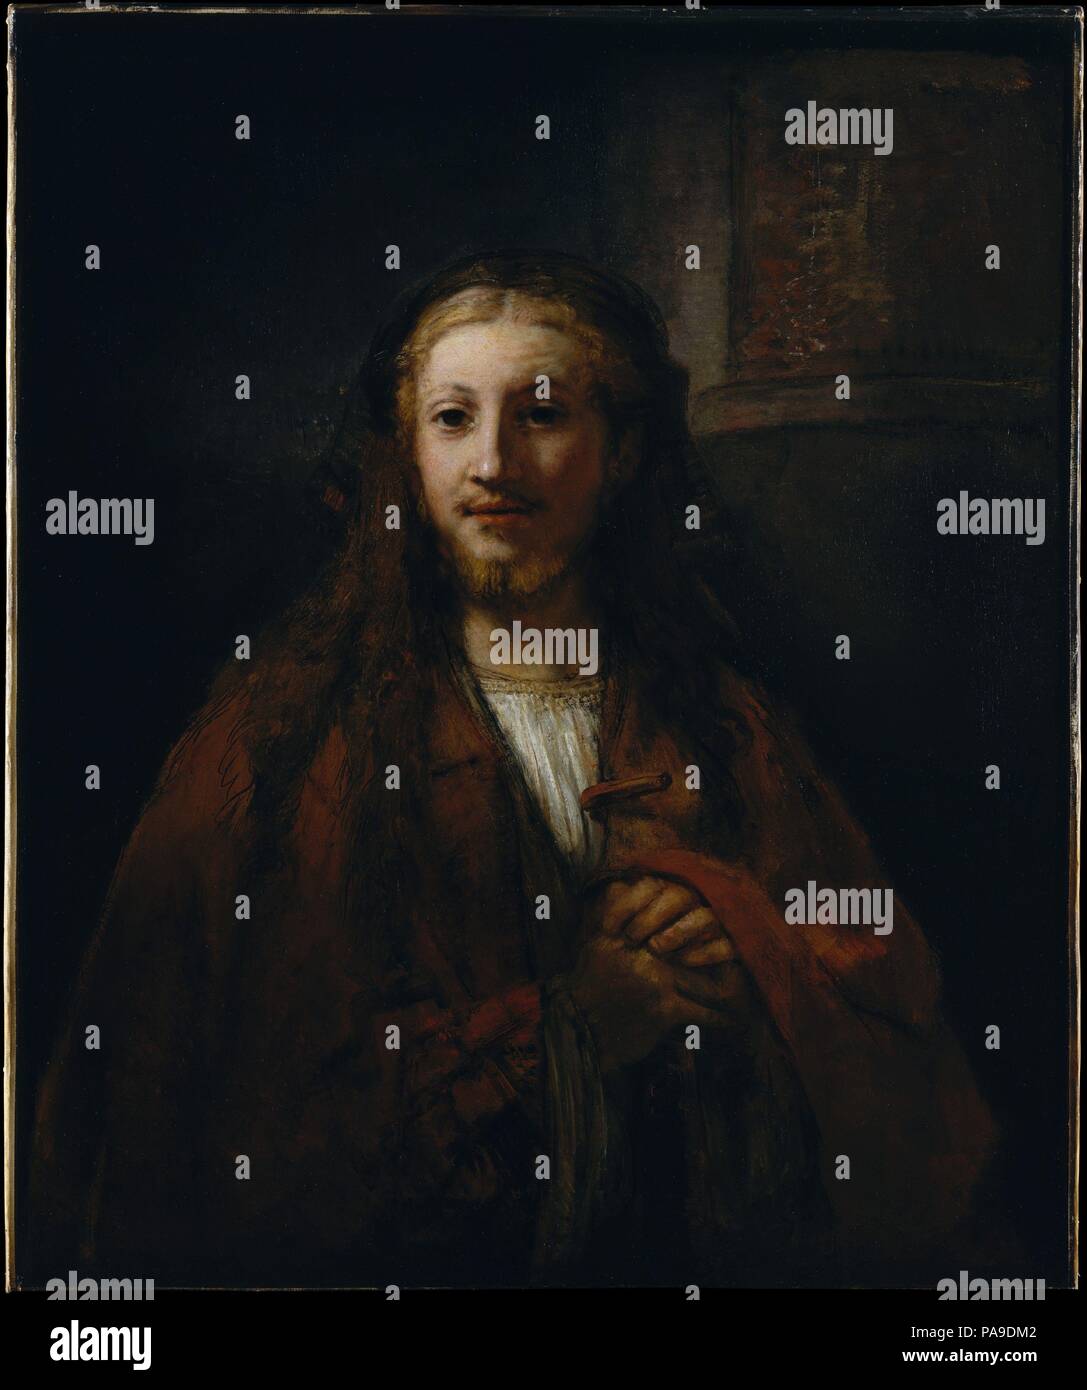 Christ with a Staff. Artist: Follower of Rembrandt (Dutch, third quarter 17th century). Dimensions: 37 1/2 x 32 1/2 in. (95.3 x 82.6 cm).  This impressive picture was clearly inspired by Rembrandt's style of the 1660s and was conceivably painted in his workshop. The broad, uniform application of paint and rather decorative use of strokes and scratches imitate some of Rembrandt's surface effects but fail to achieve his sense of volume, various textures, and atmosphere. A few scholars have suggested the manner of execution is similar to that of Arent de Gelder (1645-1727), Rembrandt's last impor Stock Photo